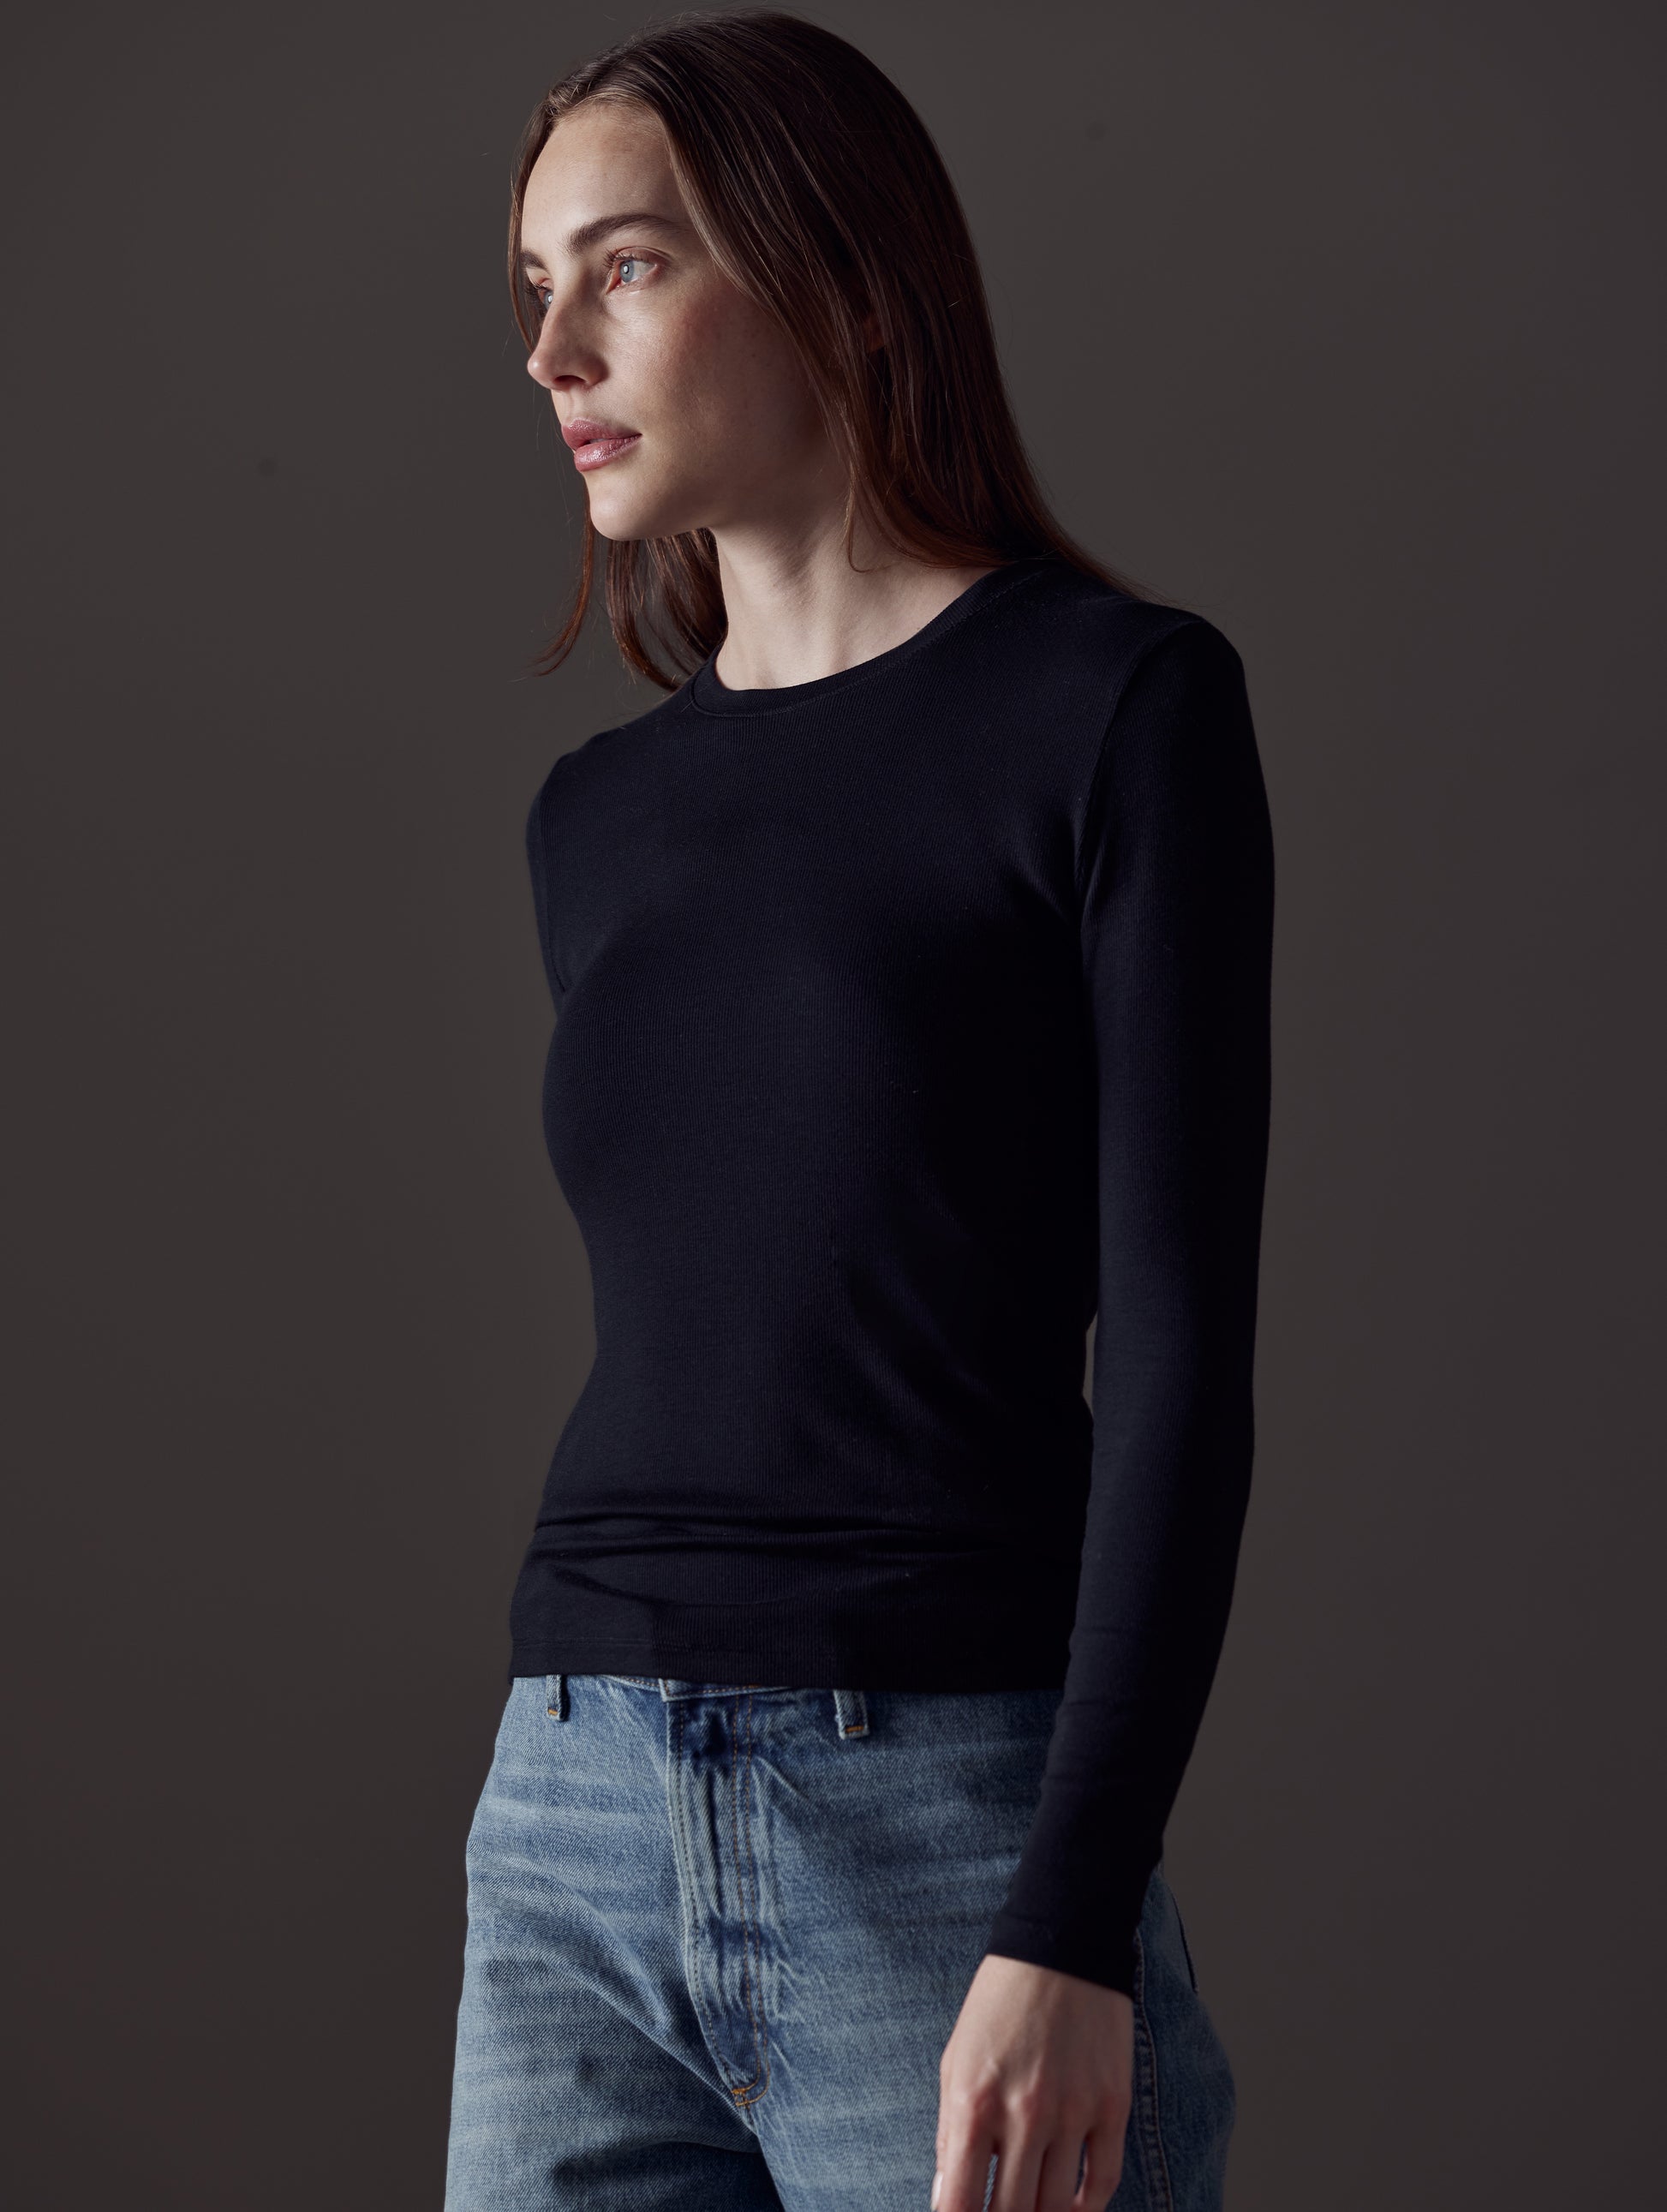 woman wearing black long-sleeve shirt from AETHER Apparel